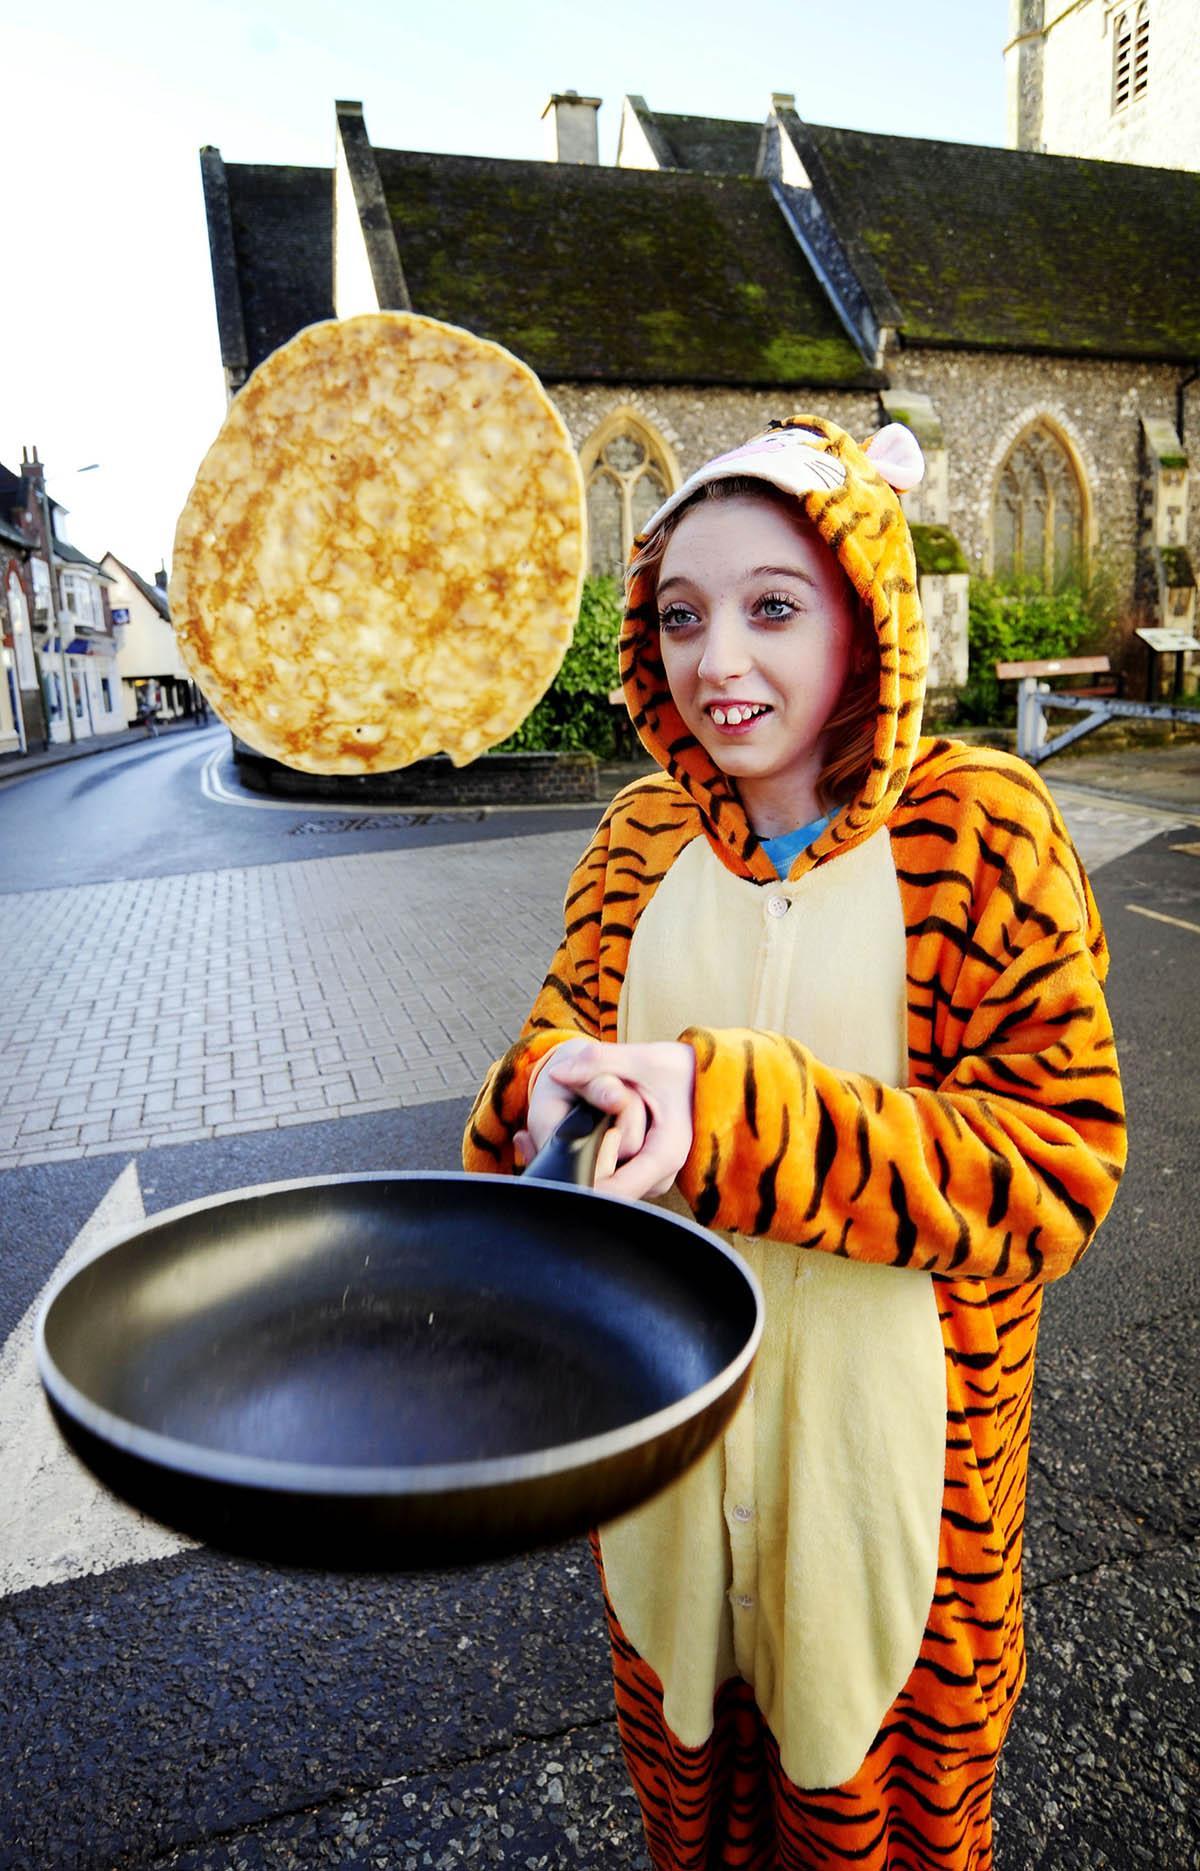 Pancake day events around Oxfordshire in pictures.